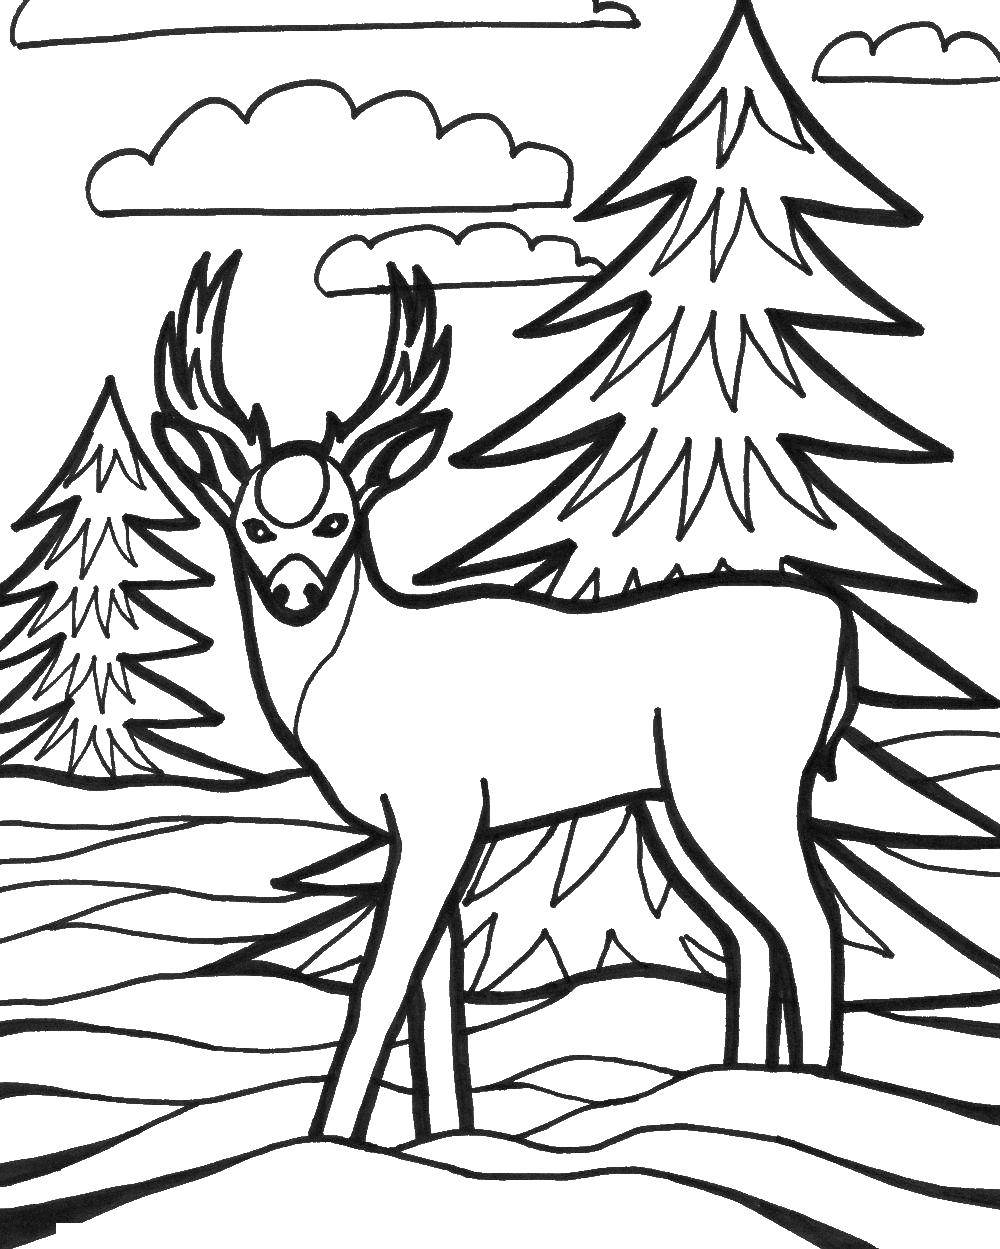 Coloring Forest deer. Category animals. Tags:  Animals, deer.